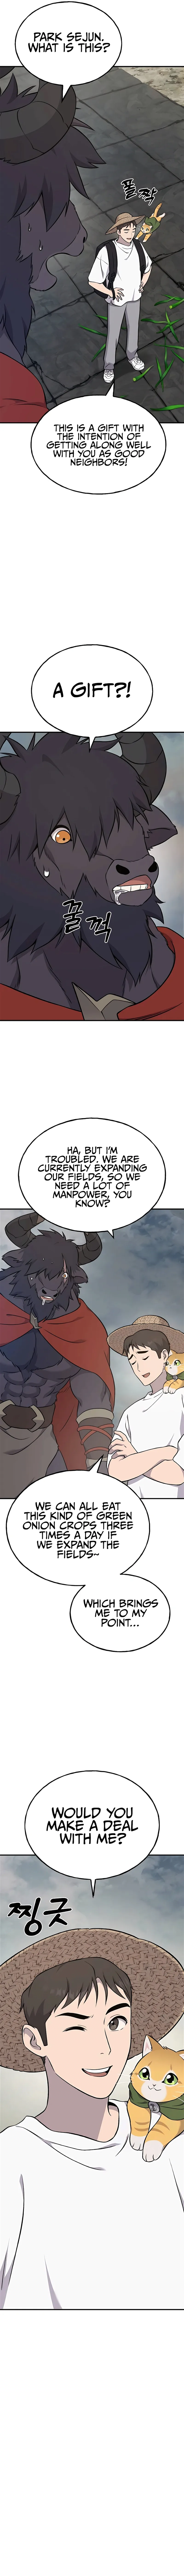 Solo Farming In The Tower Chapter 54 page 4